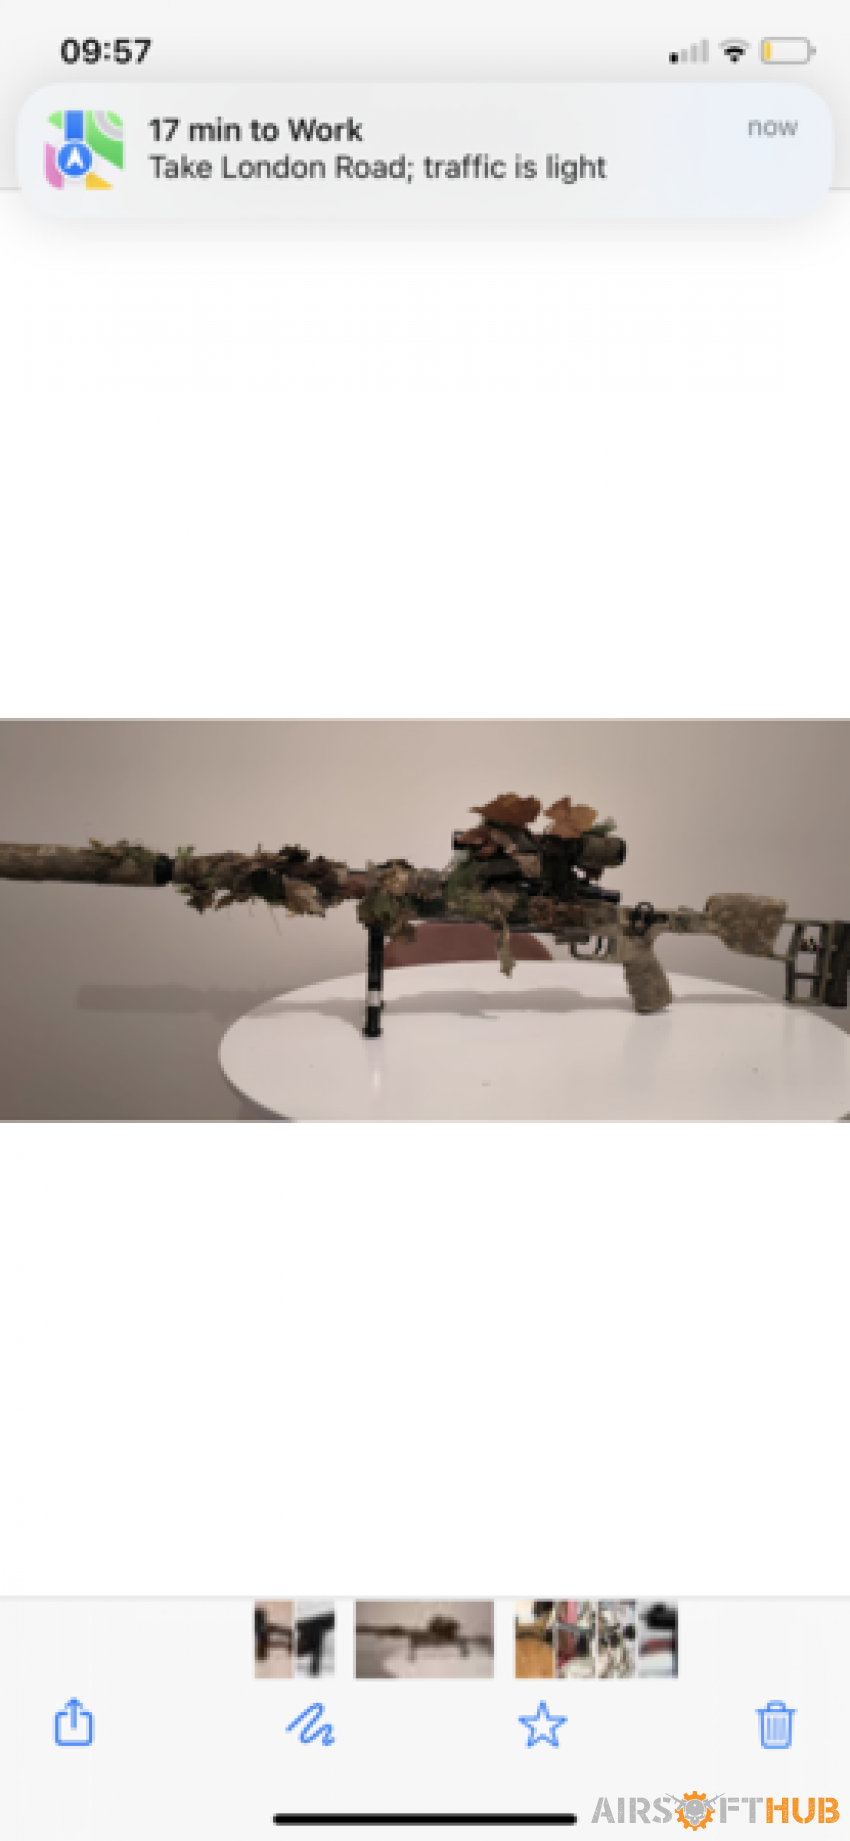 Vsr 10 upgraded - Used airsoft equipment